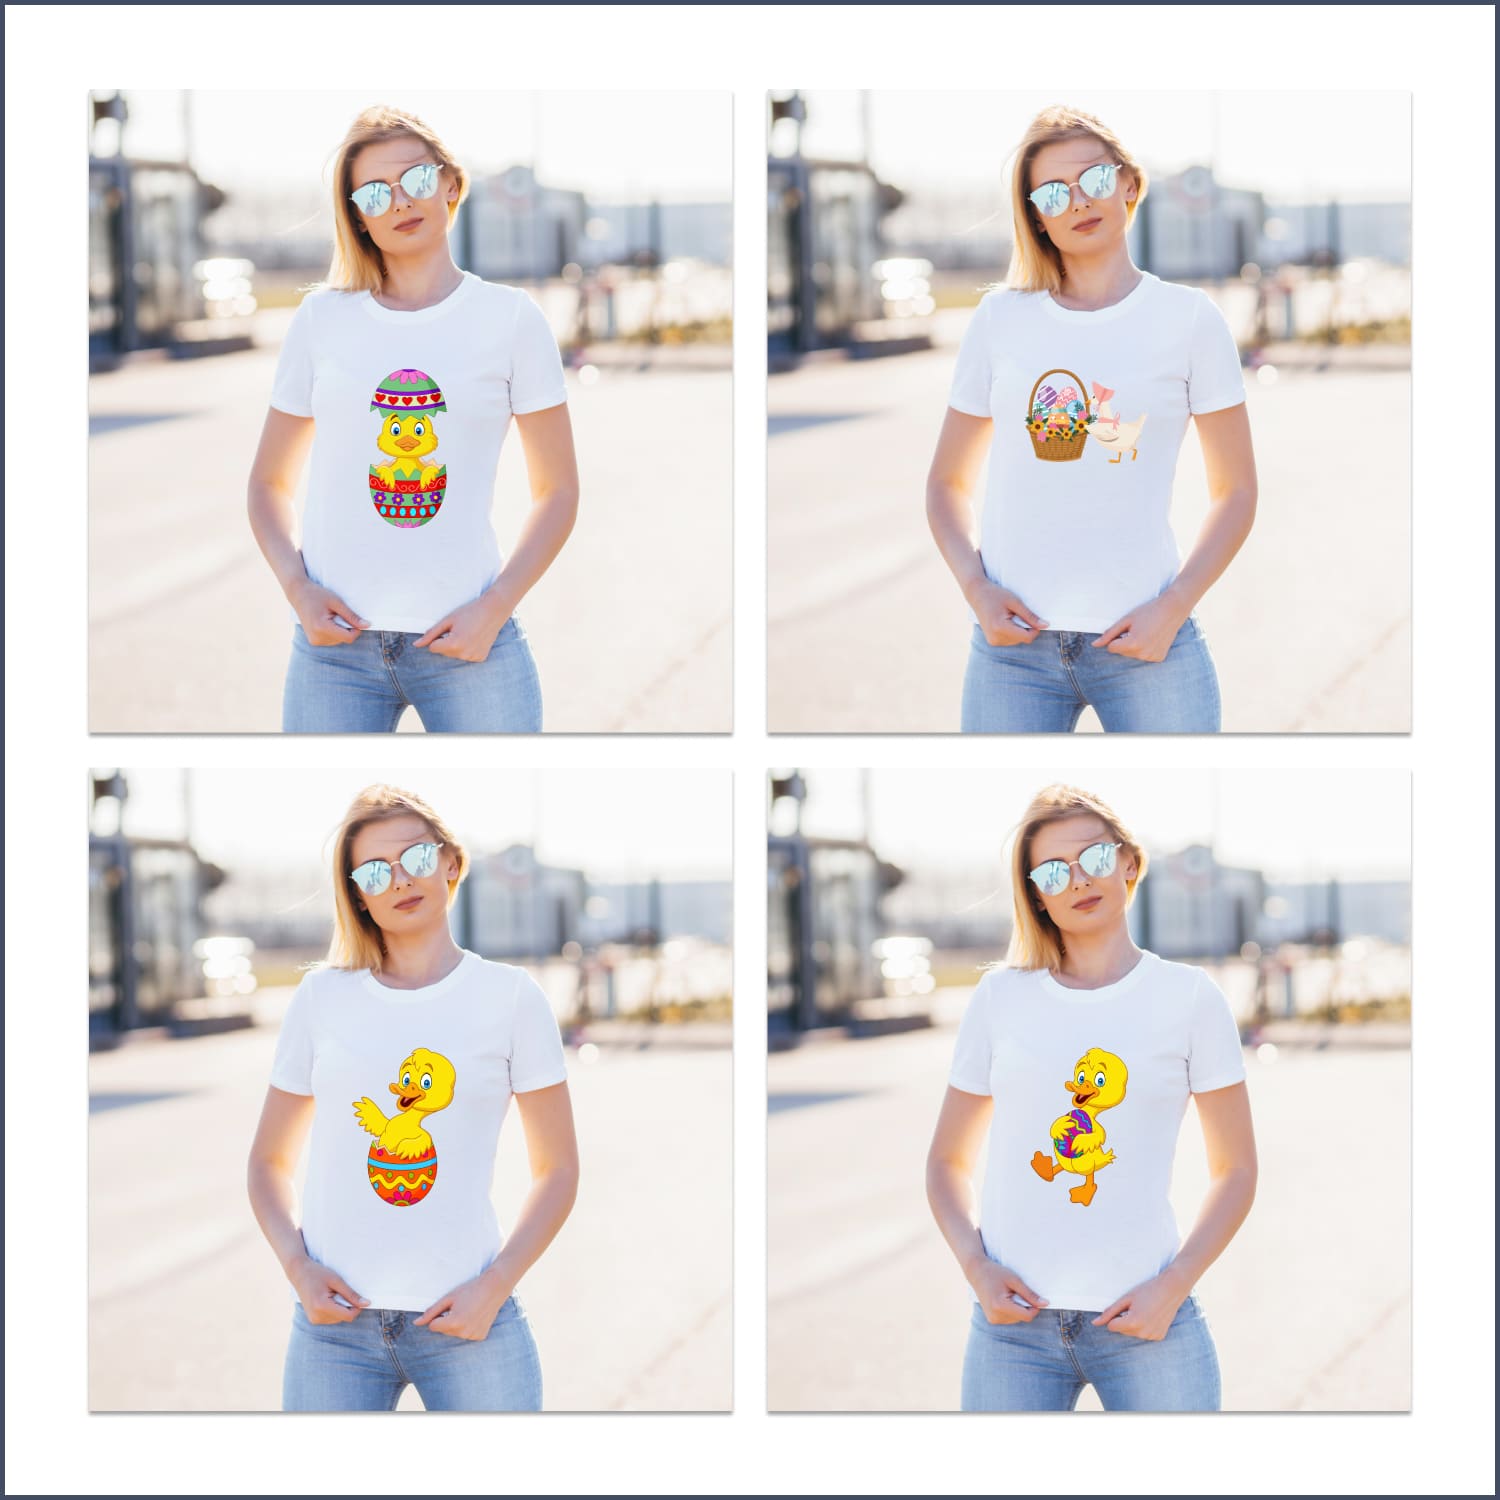 Bundle of t-shirt images with beautiful prints of easter eggs and duckling.